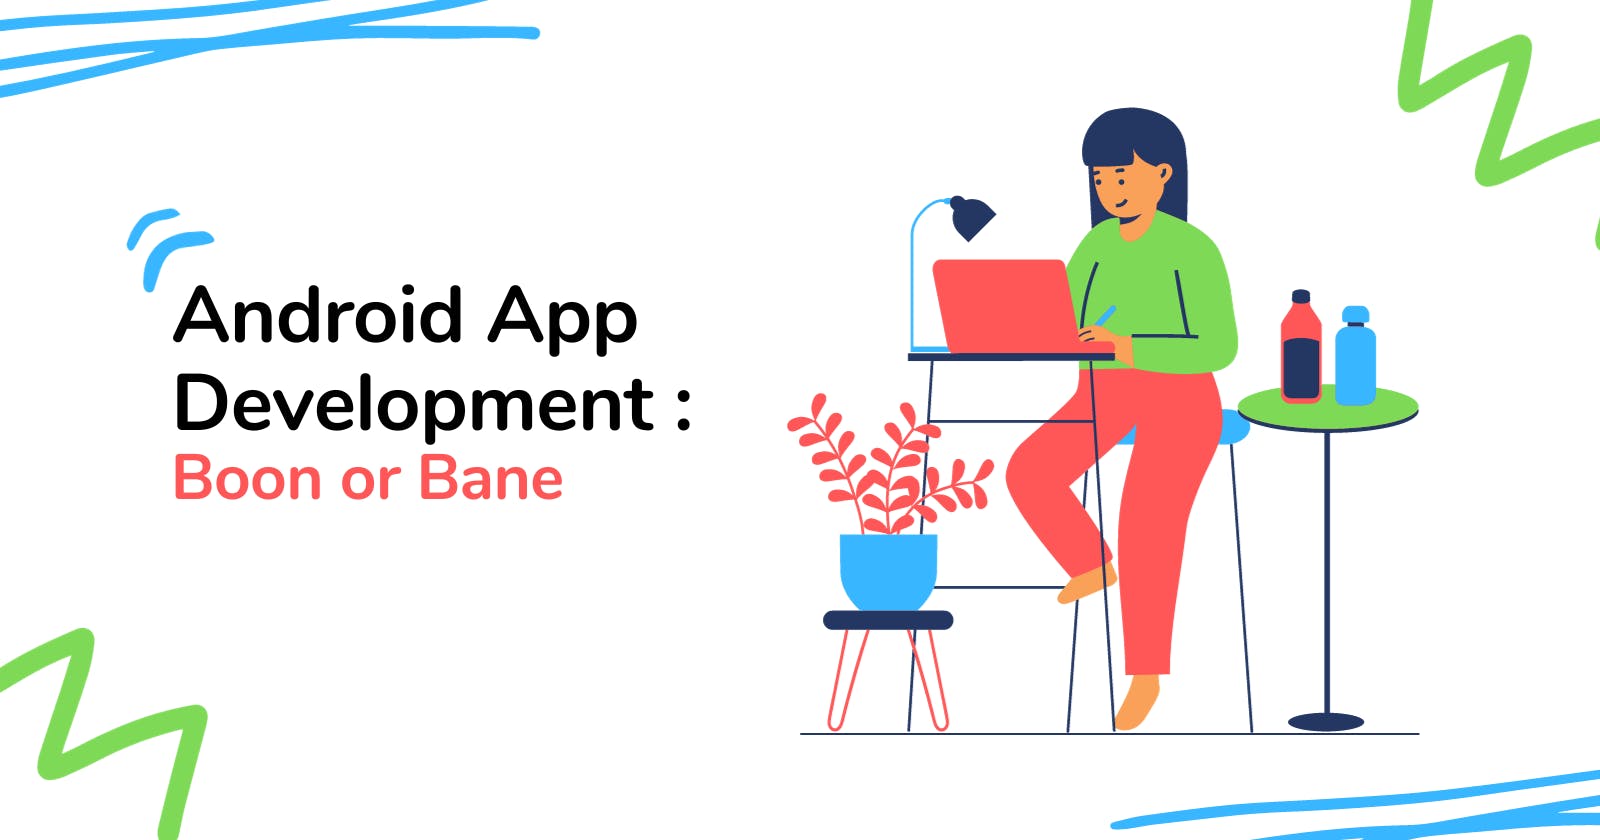 Android App Development: A Boon or A Bane?